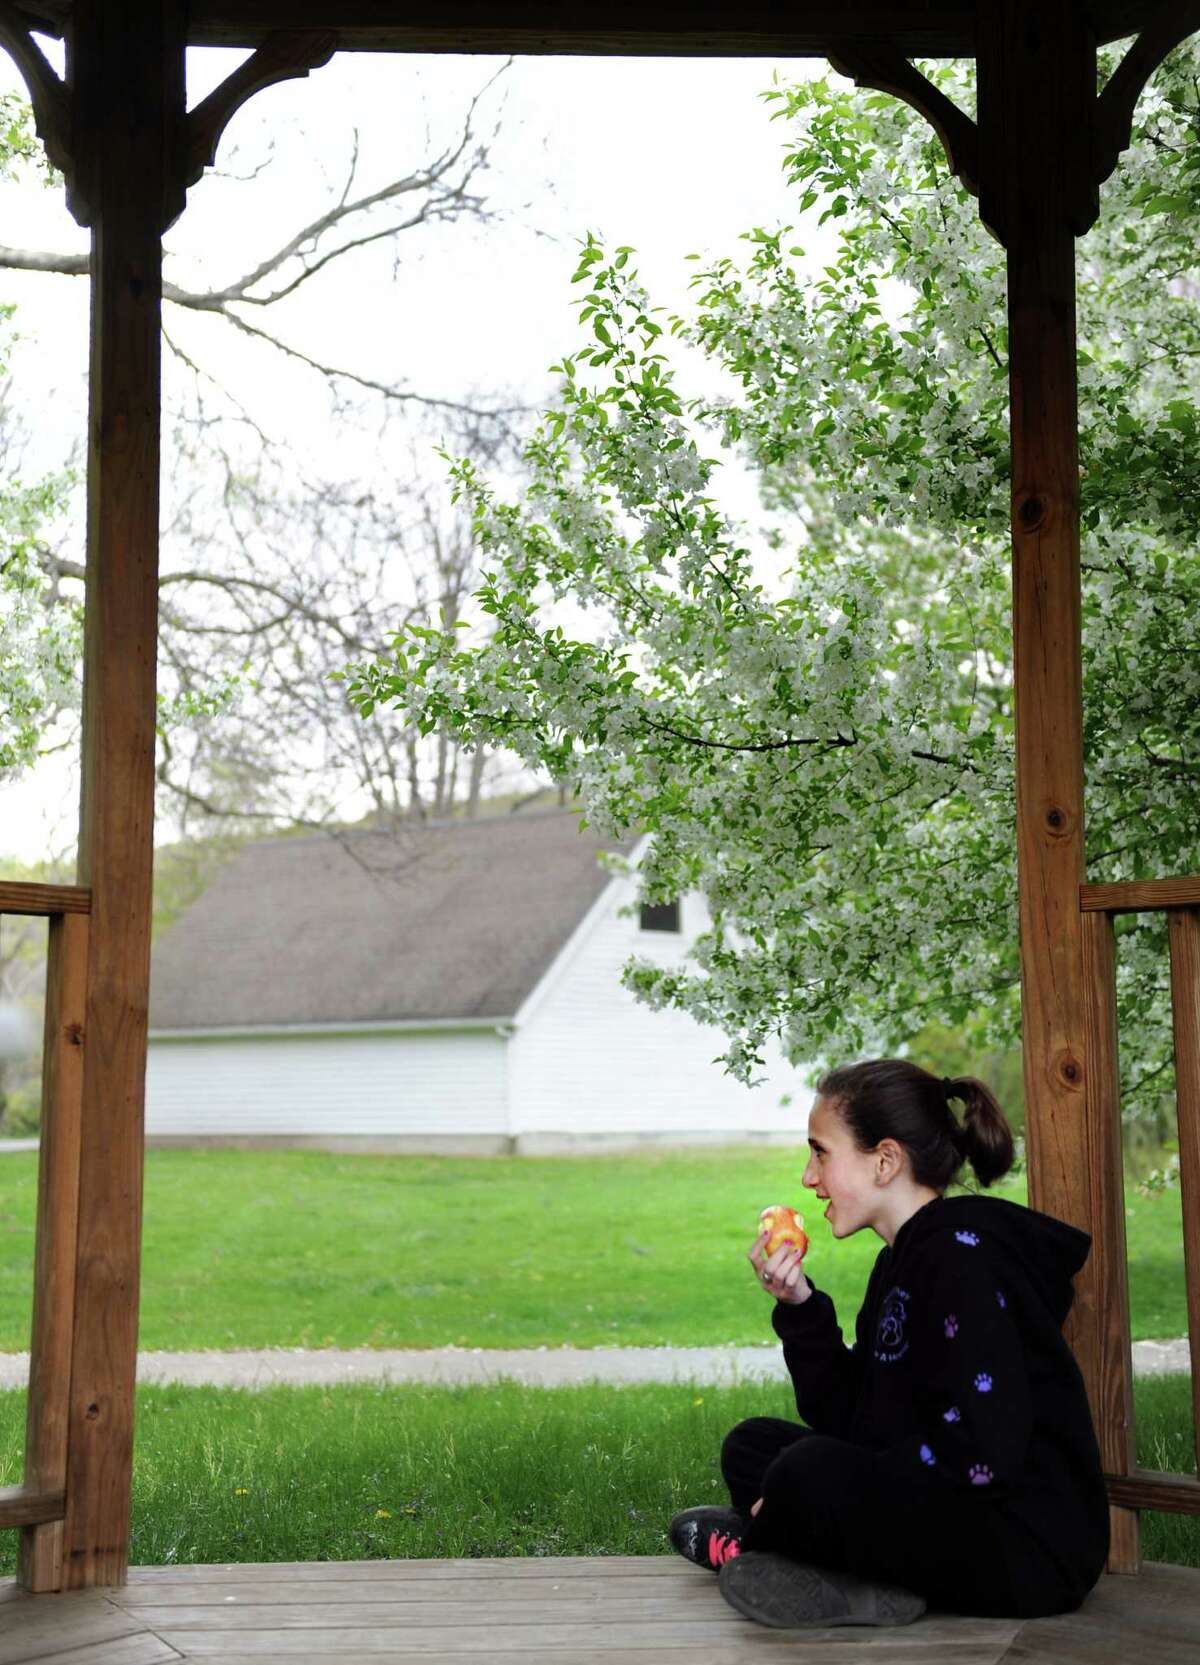 Thirteen-year-old Emma Hue, an 8th-grade-student at Whisconier Middle School in Brookfield, eats her lunch under the gazebo at the Kellogg Environmental Center Wednesday, April 25, 2012 following a field trip to the center in Derby. The trip was part of Project CLEAR (Candlewood Lake Environmental Awareness and Responsibility) which teaches 125 middle and high school students how to be citizen scientists. Students explored Osbornedale State Park, testing water quality and discerning between native and invasive birds.